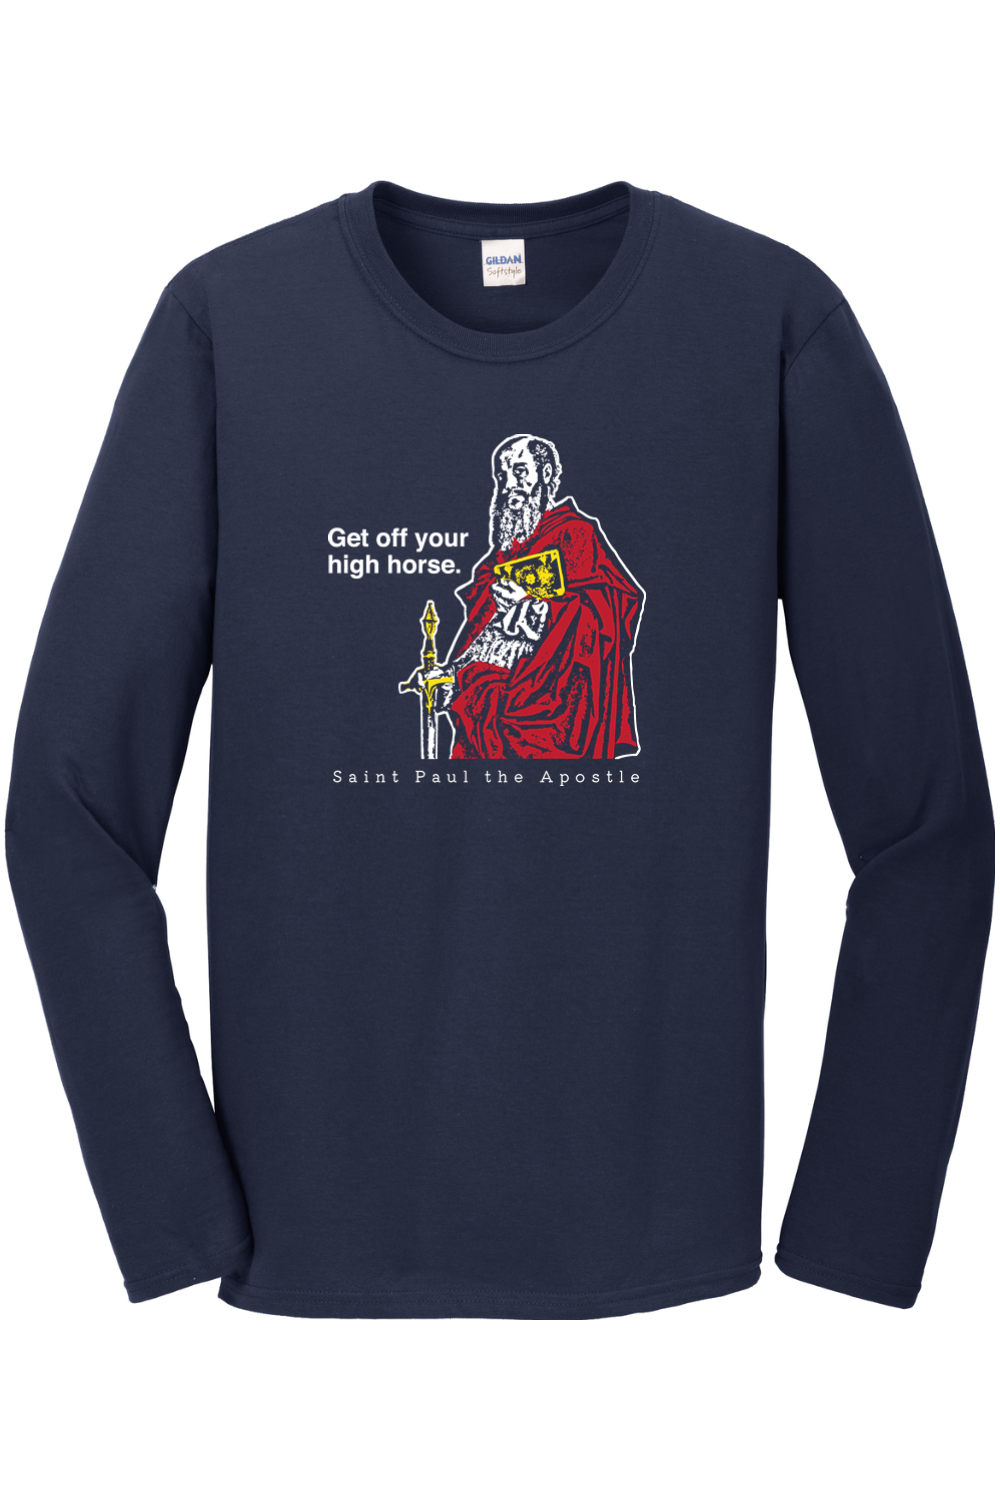 Get Off Your High Horse - St. Paul the Apostle Long Sleeve